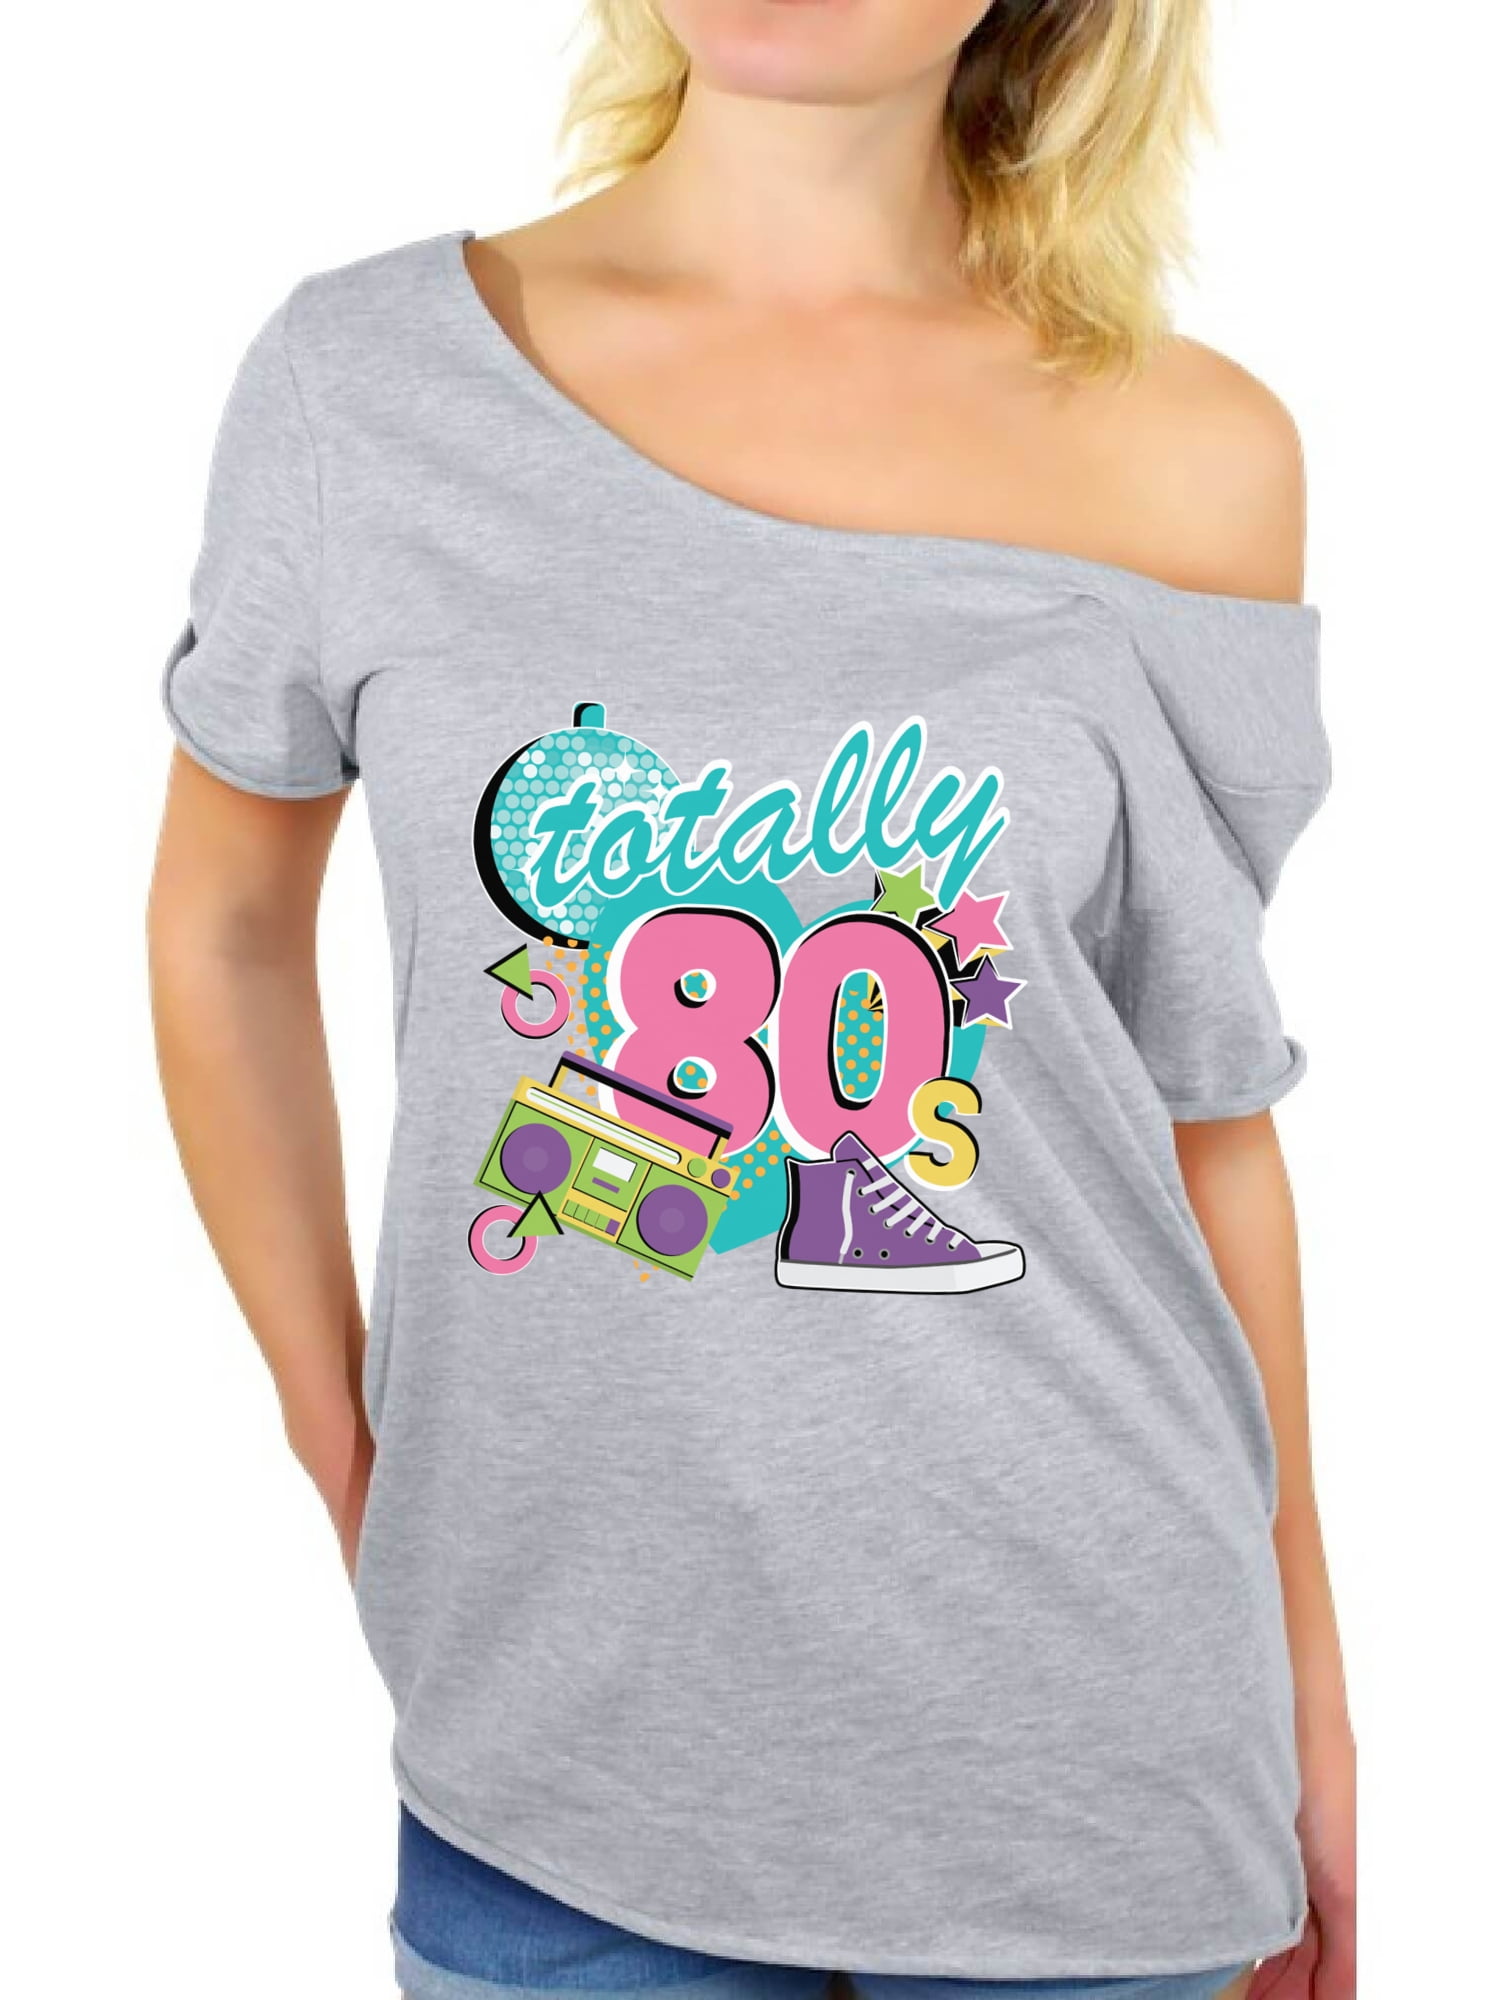 Vintage 80s Style Women's Fashion Design Essential T-Shirt for